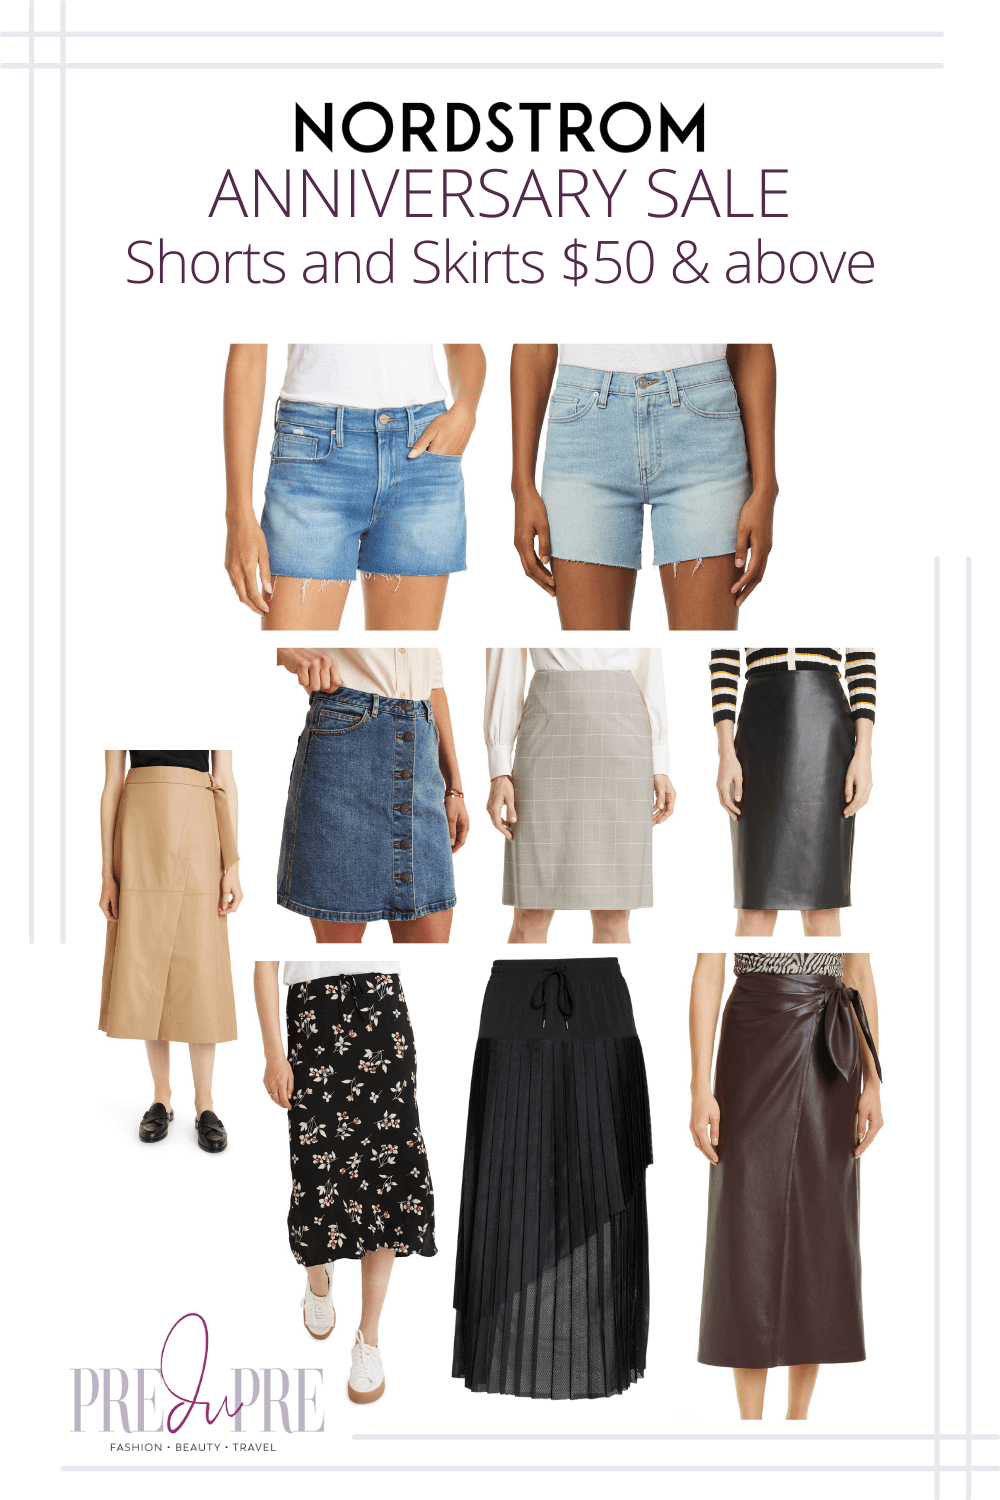 Nordstrom Anniversary Sale shorts and skirts $50 and above